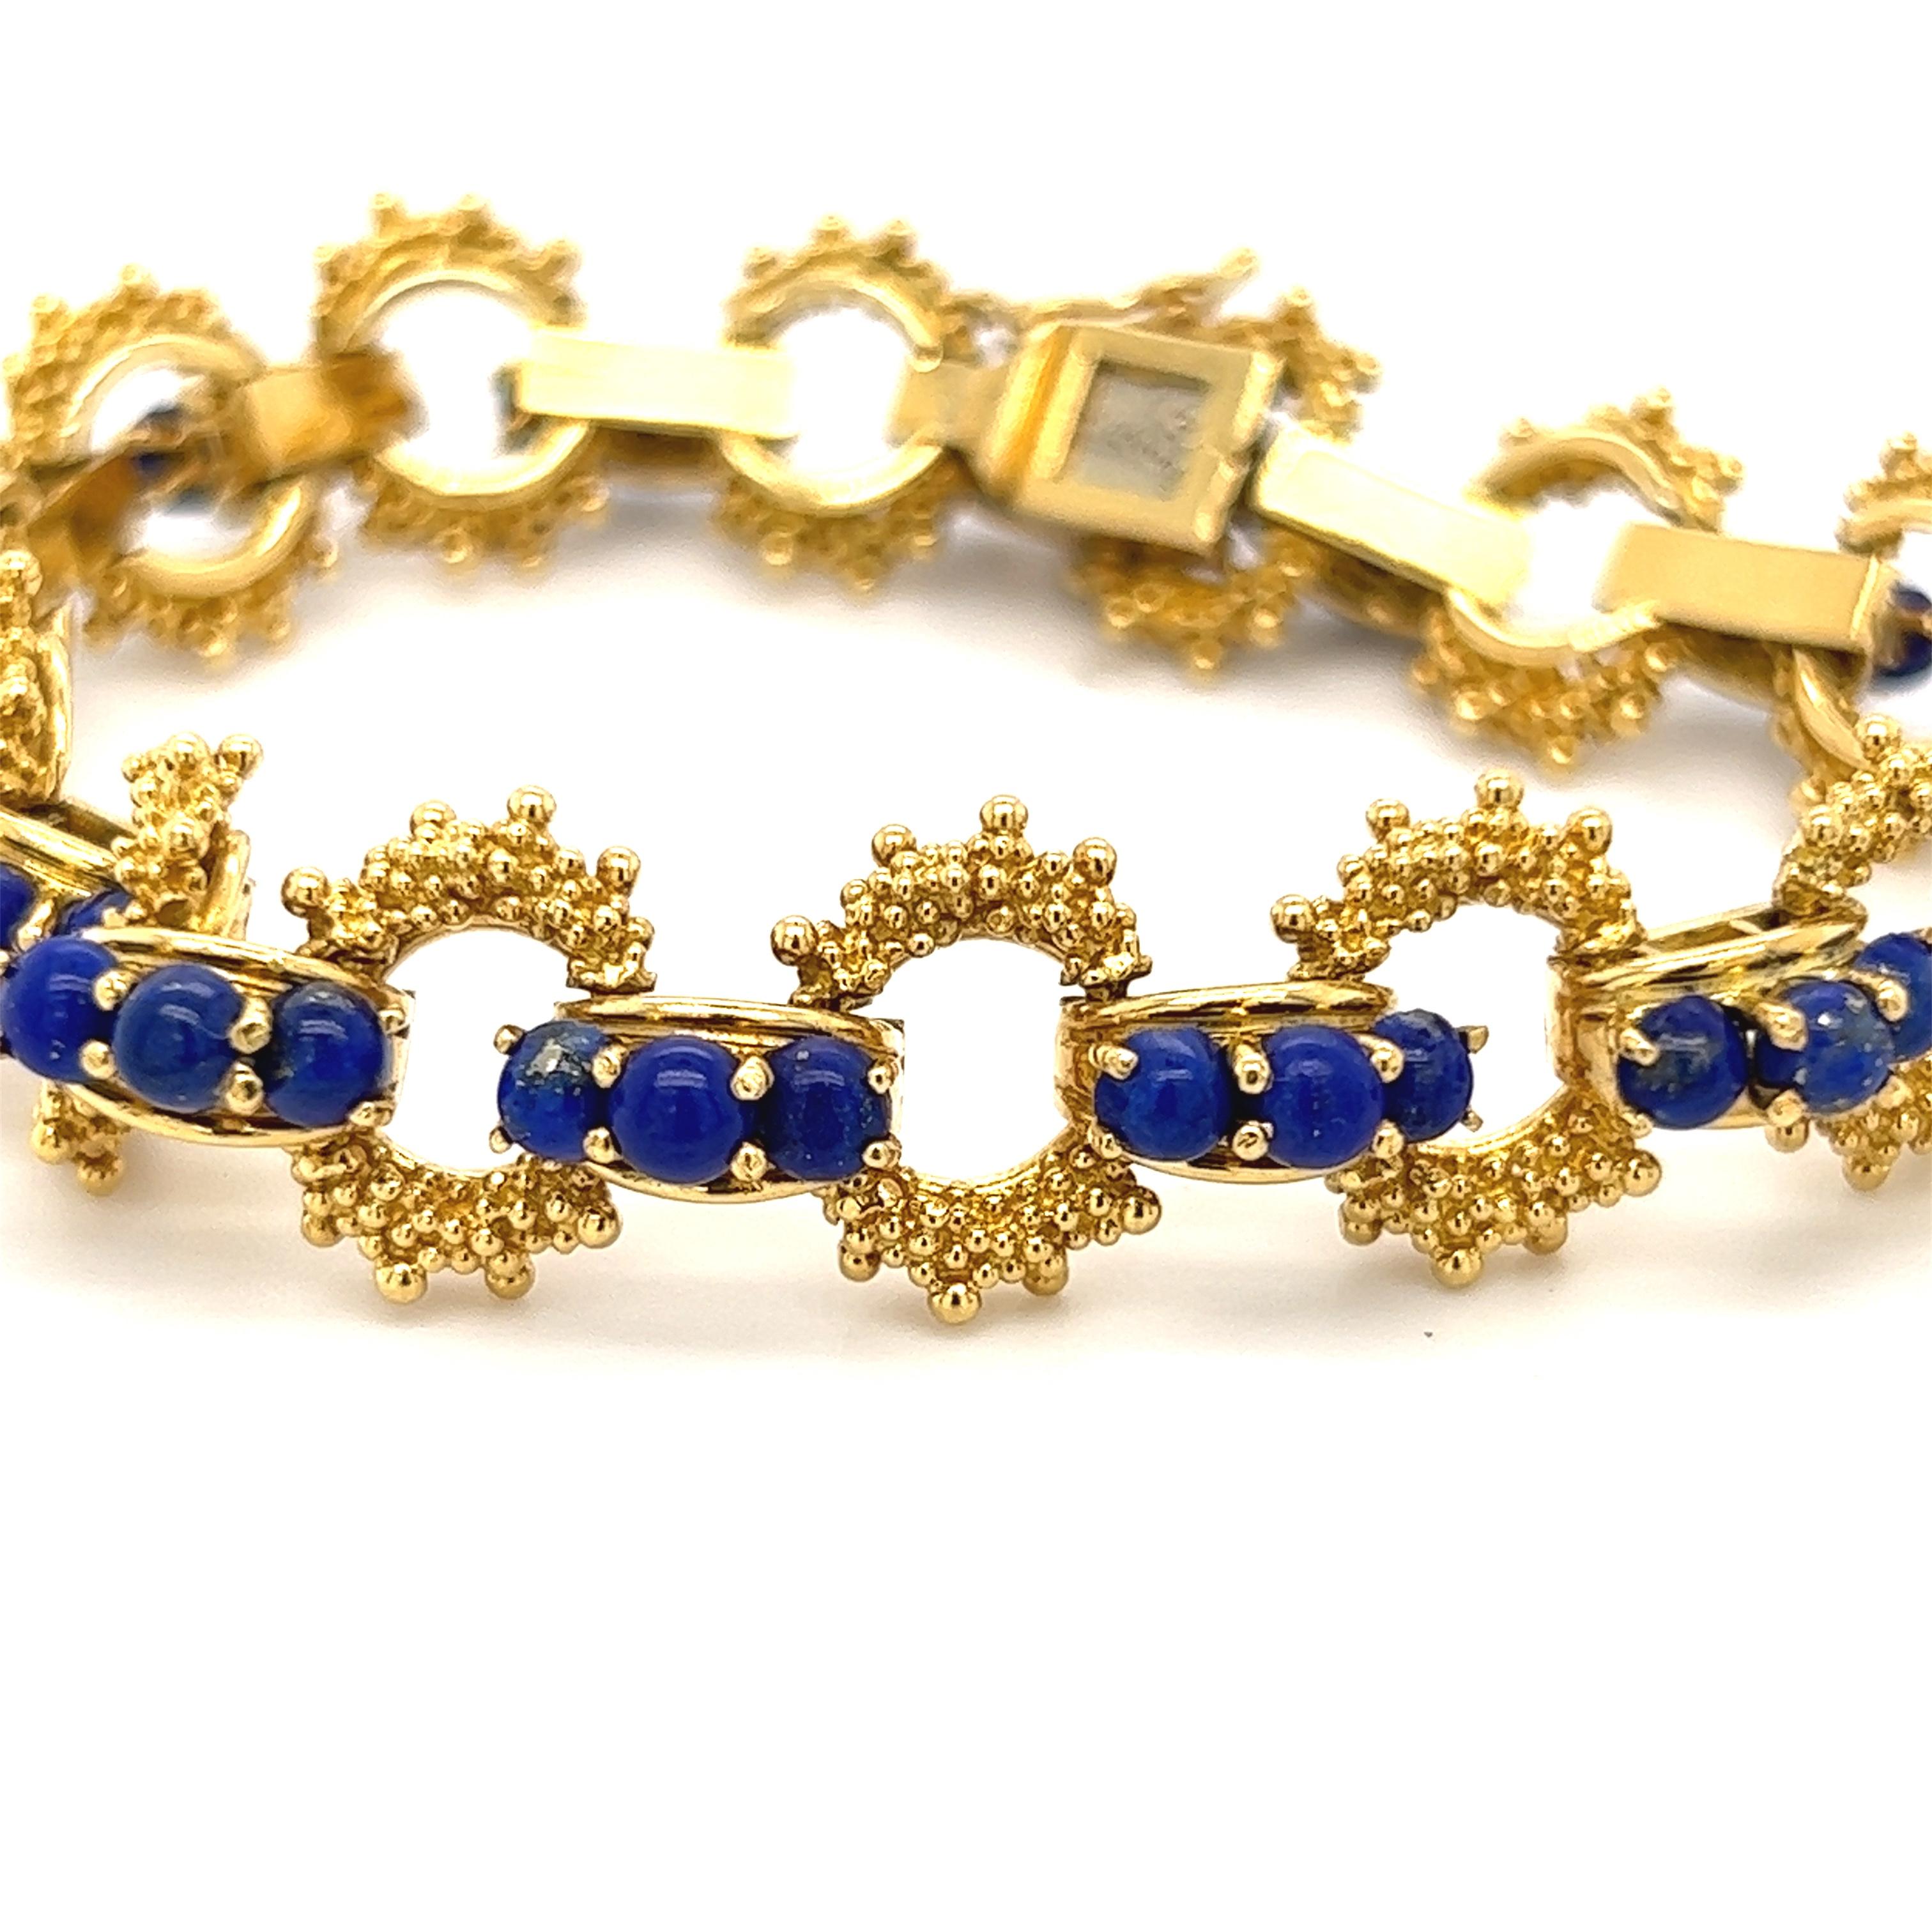 Beautiful Tiffany & Co. vintage lapis beaded bracelet. Very couture.

Details:

41- Lapis Beads- 3.1mm
18kt Yellow Gold